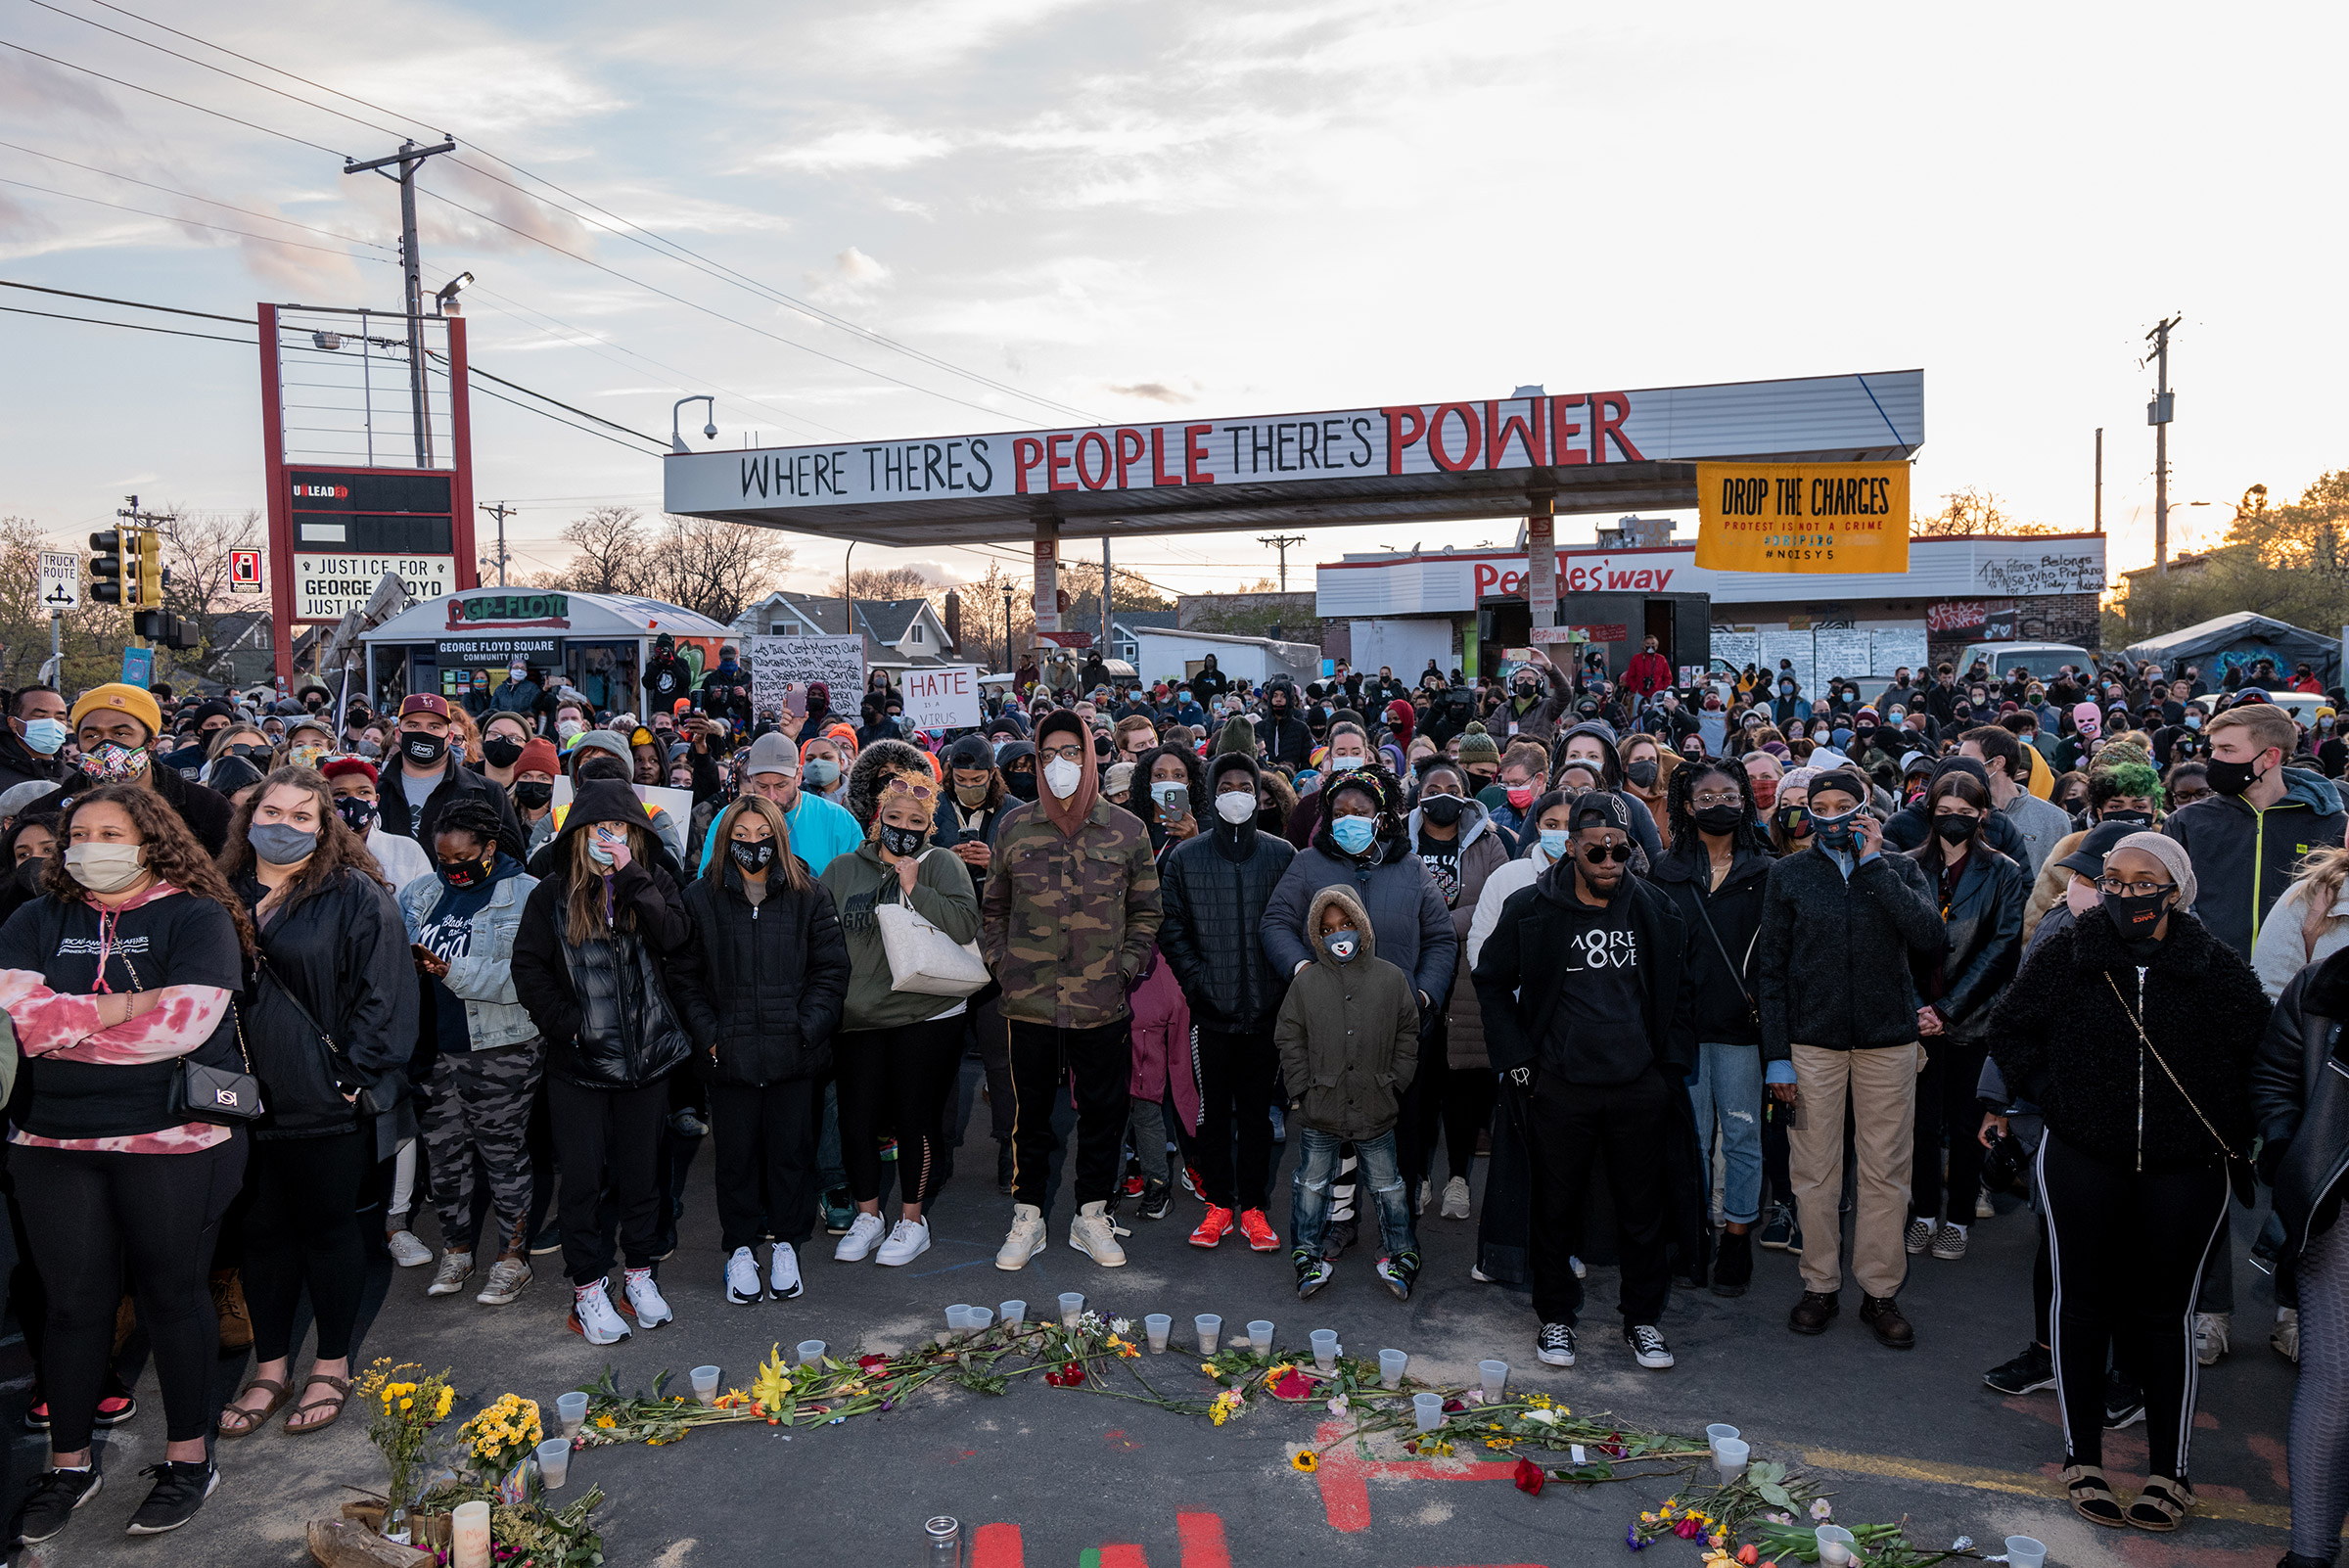 Crowds gather to honor <a href="https://time.com/5957143/george-floyd-black-america-pain/">George Floyd</a> following the guilty verdict in the trial of Derek Chauvin in Minneapolis on April 20. (Ruddy Roye for TIME)